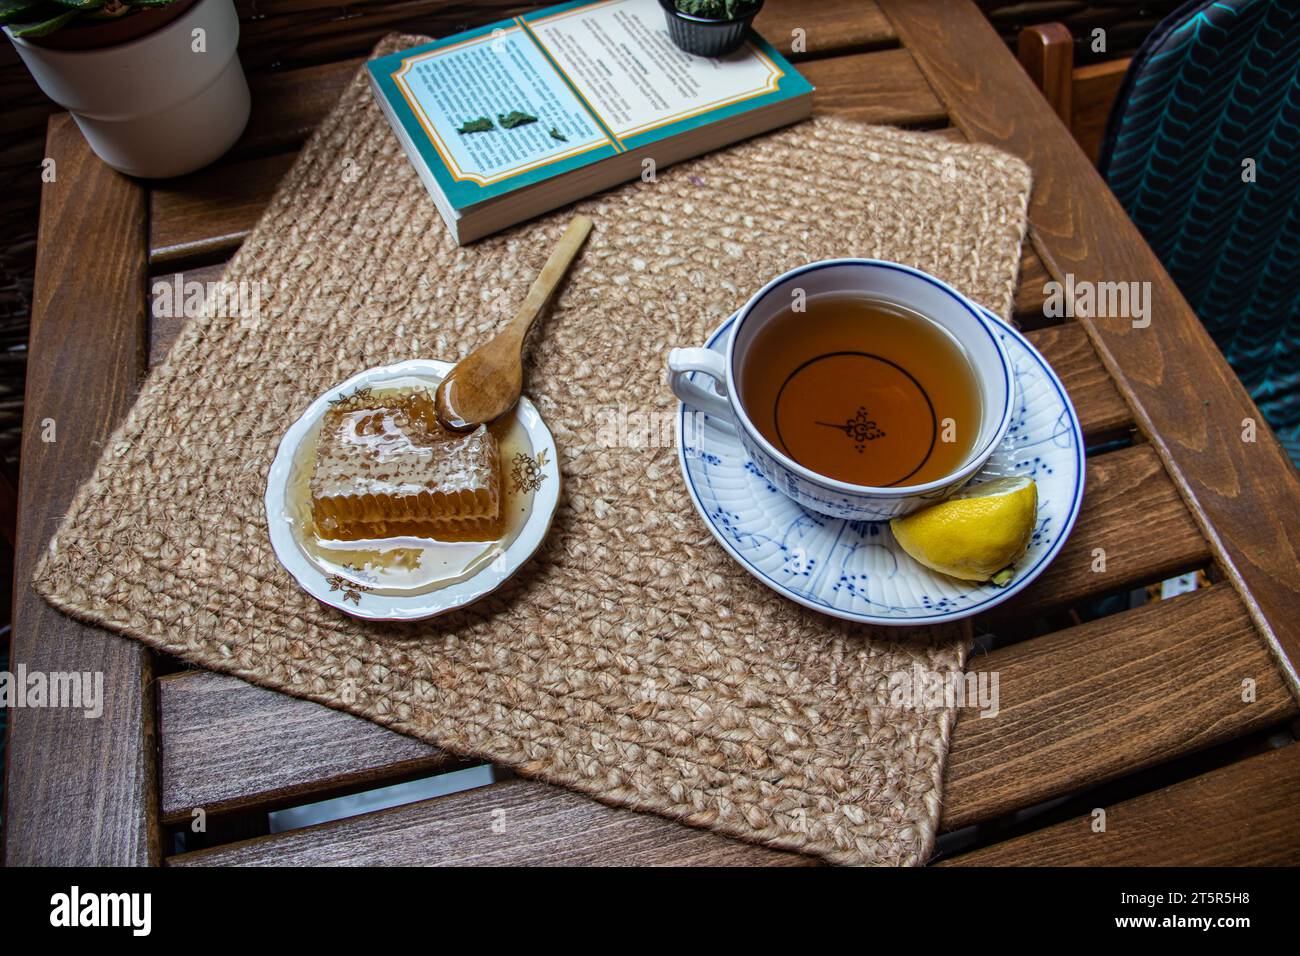 Morning setup on wooden table at balcony, books to read, cup of natural tea, teapot, organic honey from farm, fresh green tea leaves and organic fruit Stock Photo